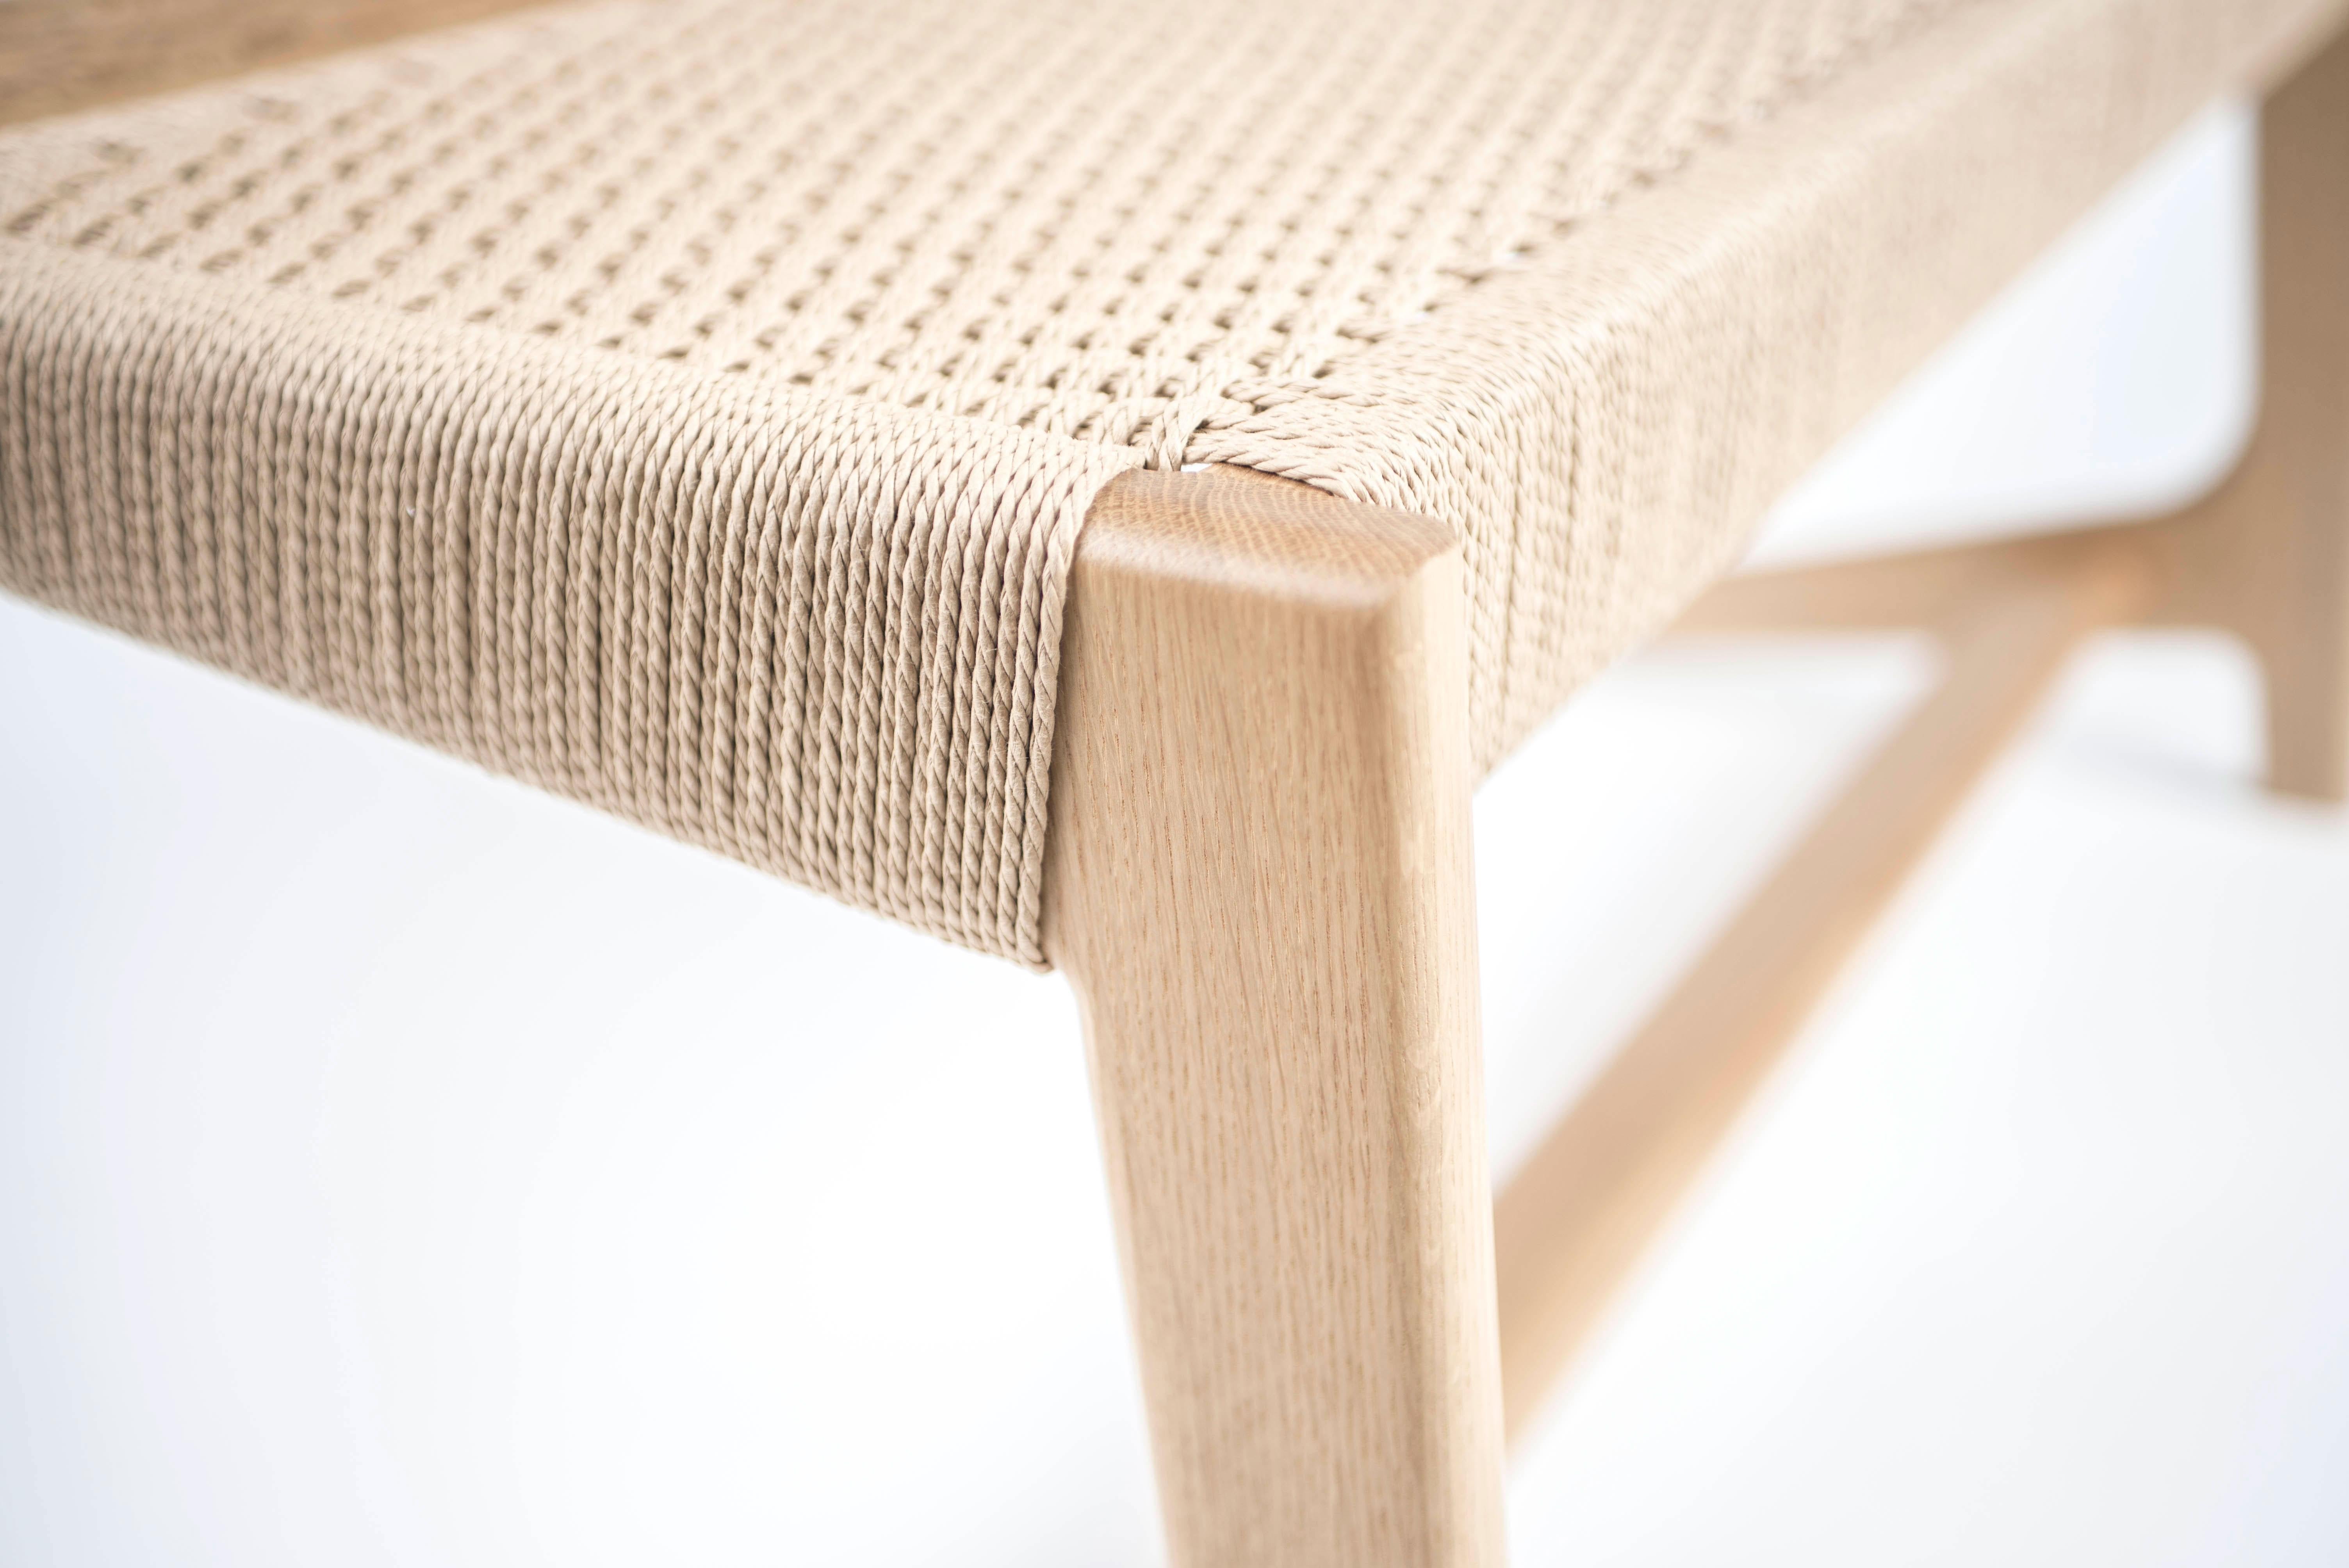 Hand-Crafted Bench, Cantilever, White Oak, Woven Danish Cord, Mid Century, Hardwood, Semigood